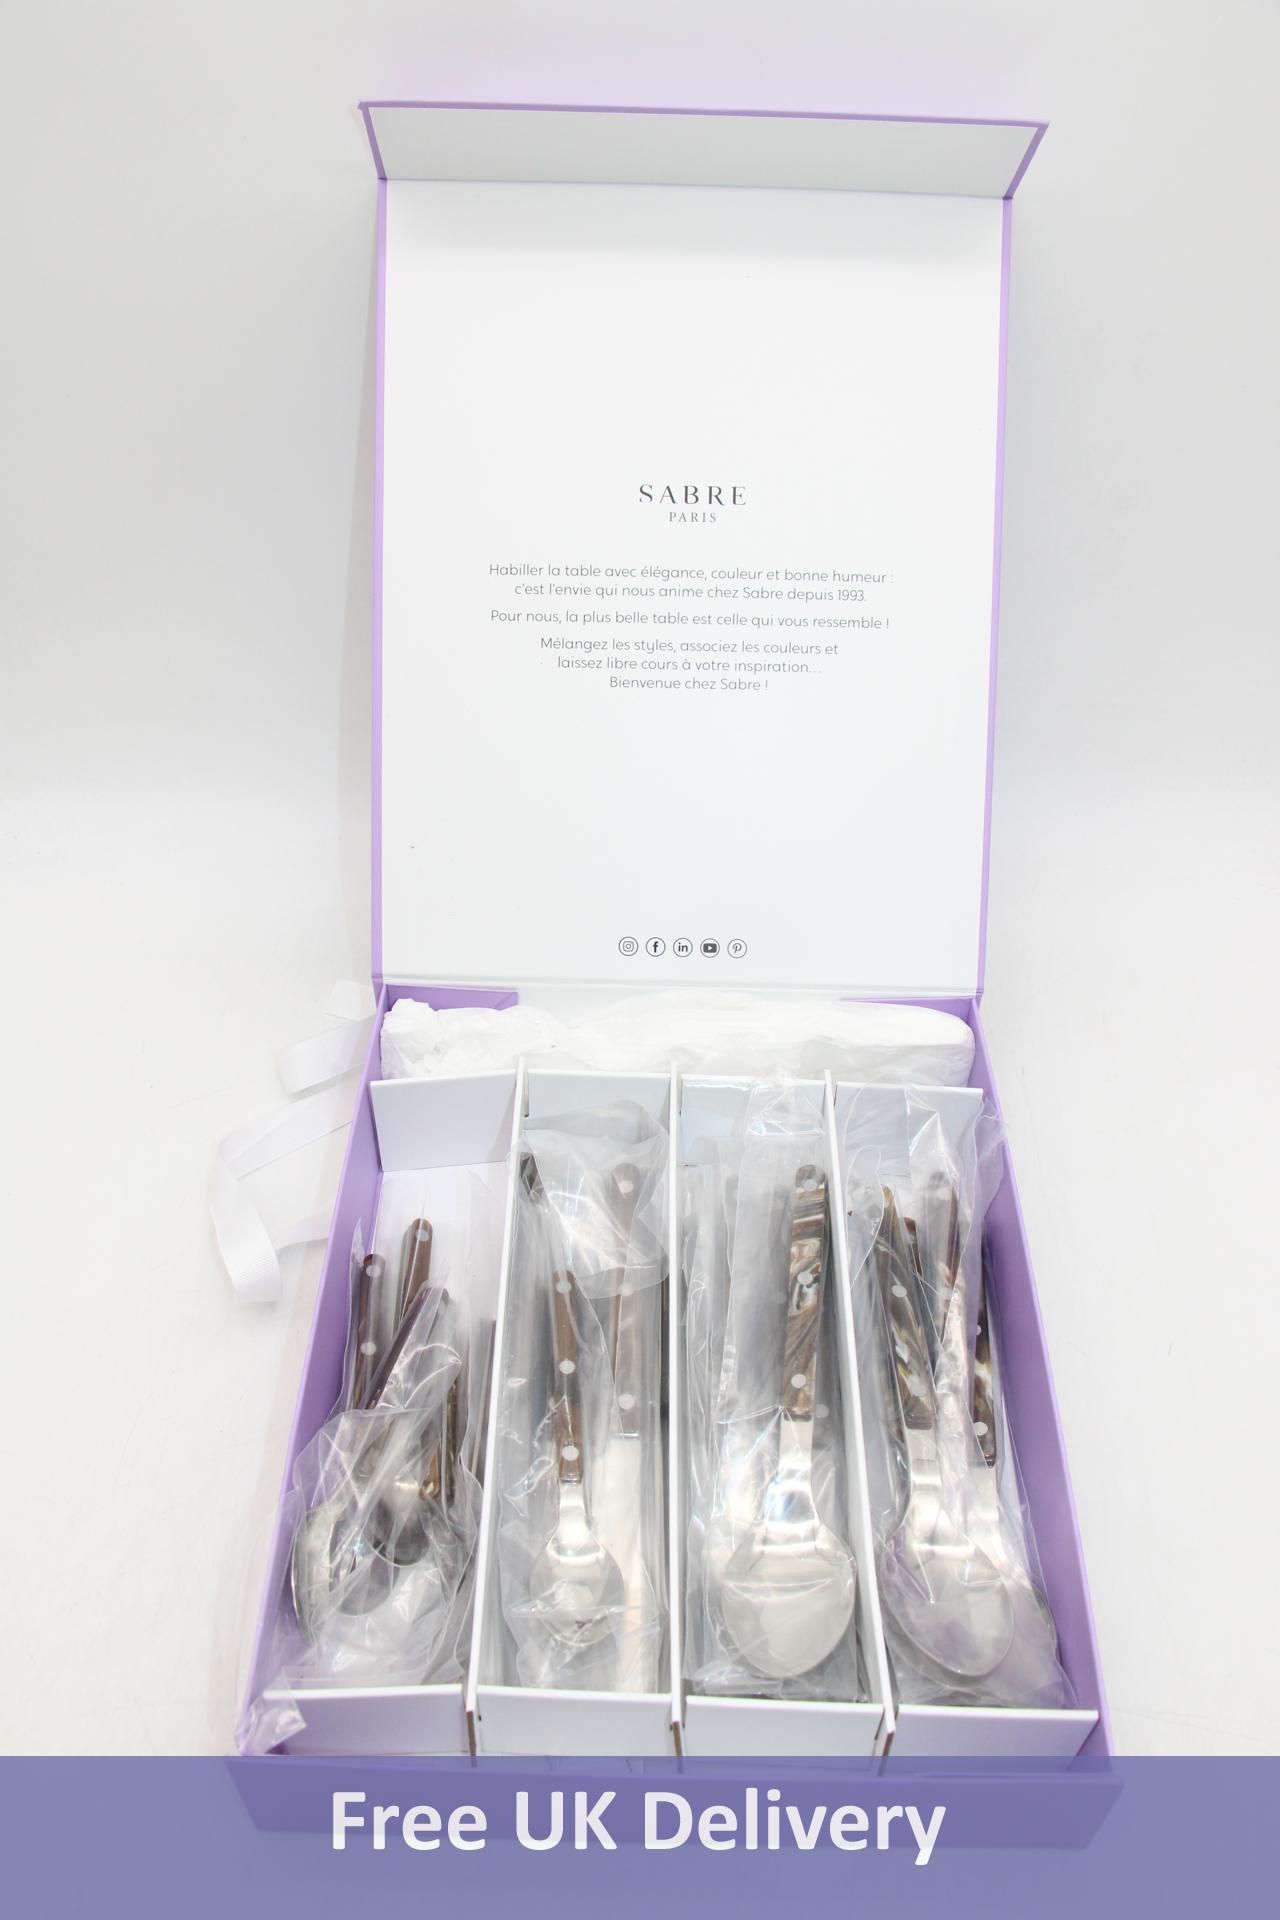 Sabre Twenty-four Piece Buffalo Bistrot Cutlery Set. OVER 18's ONLY